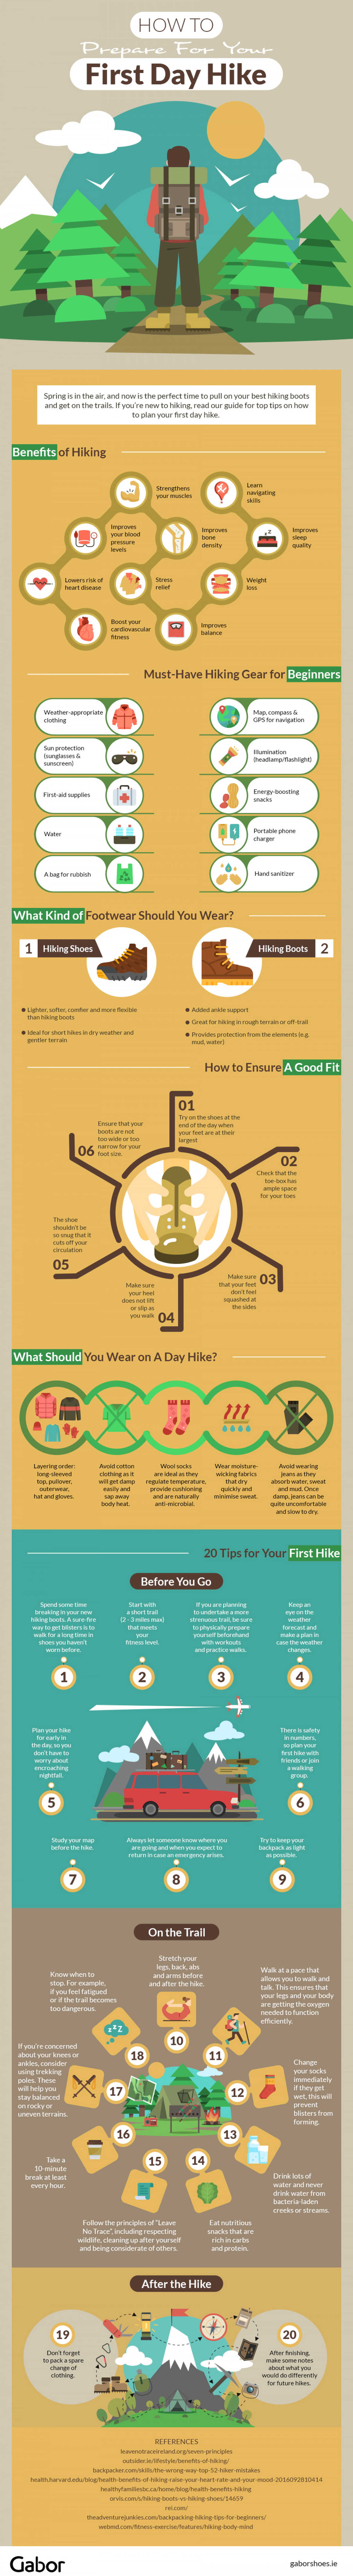 First Day Hike Infographic